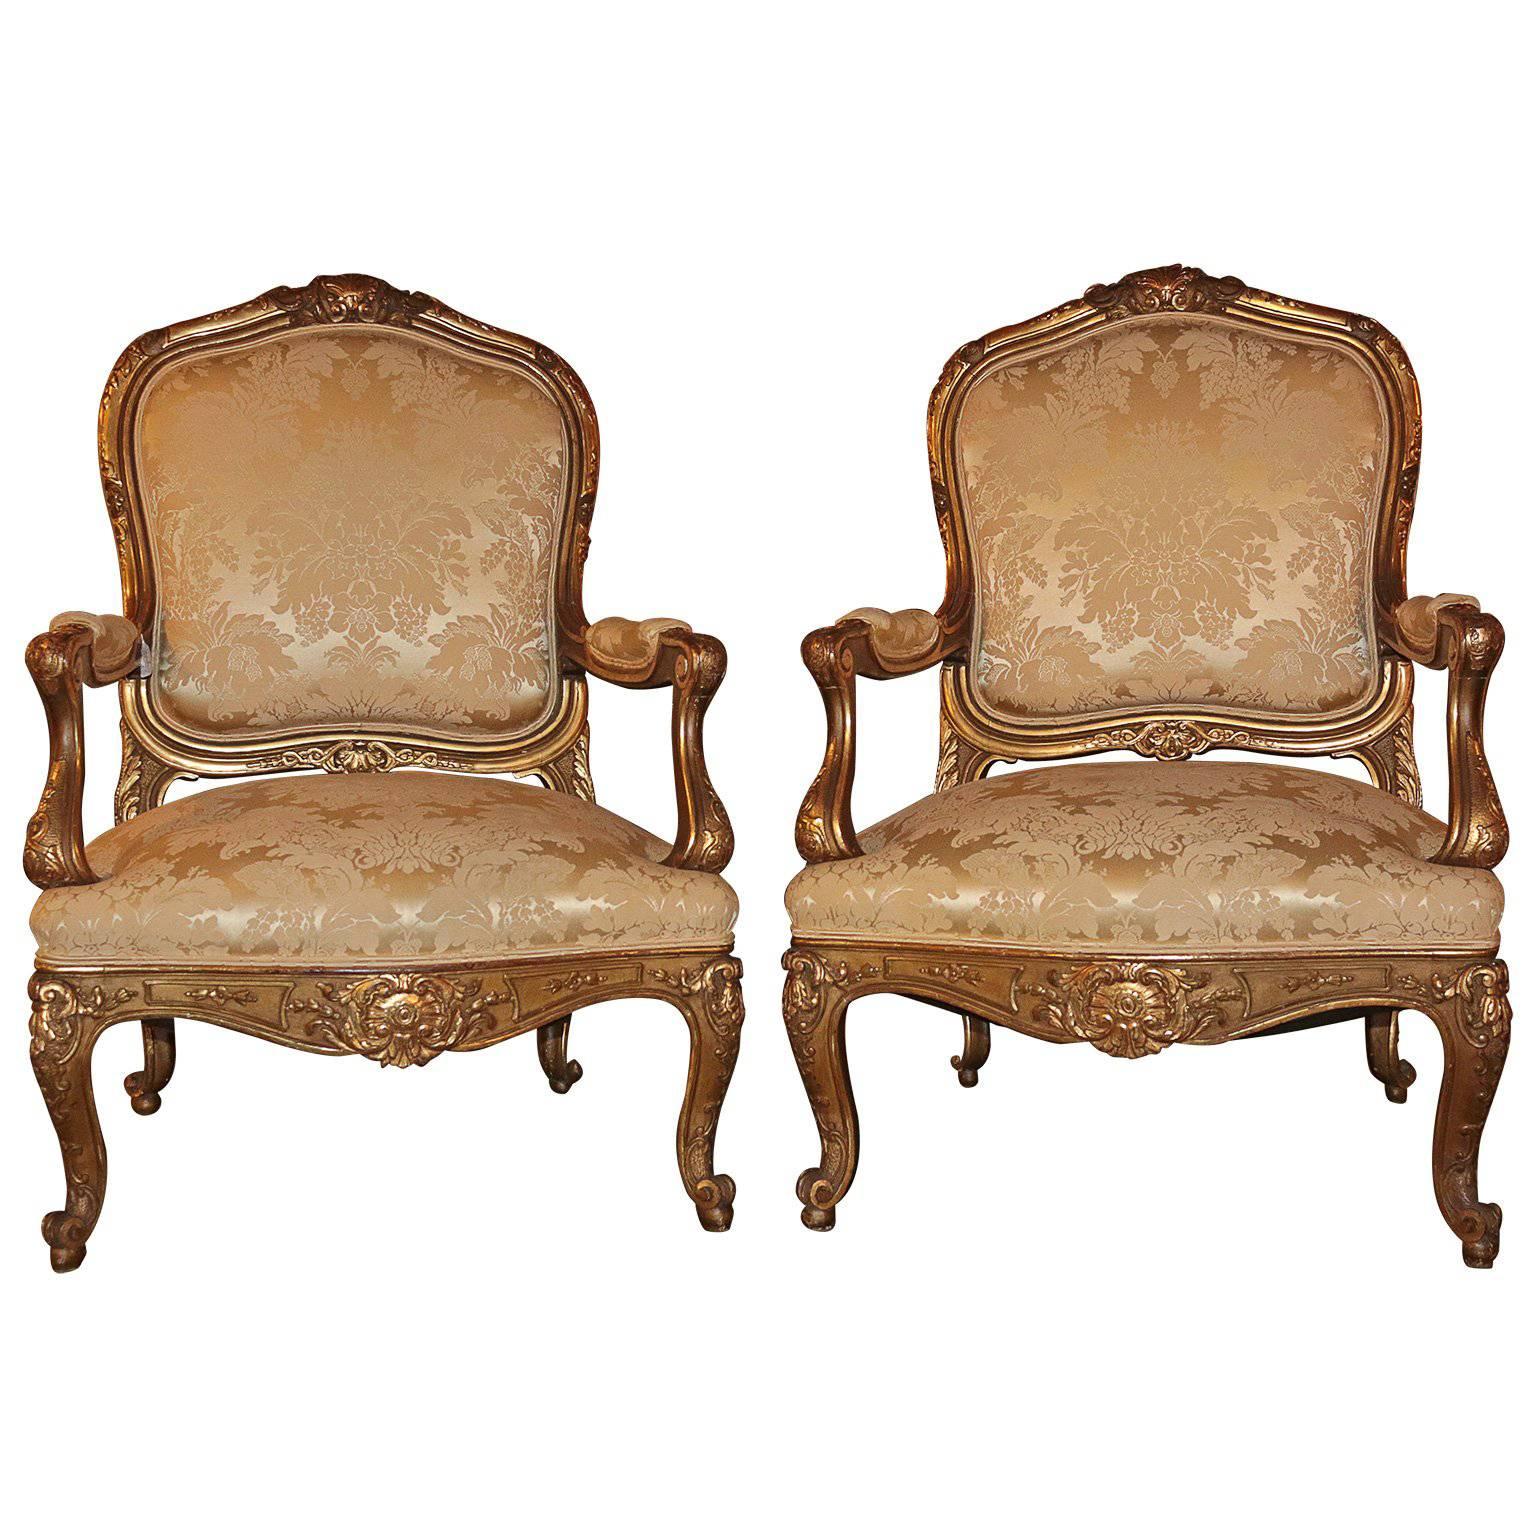 Pristine Pair of Museum Quality 19th Century French Giltwood Armchairs 